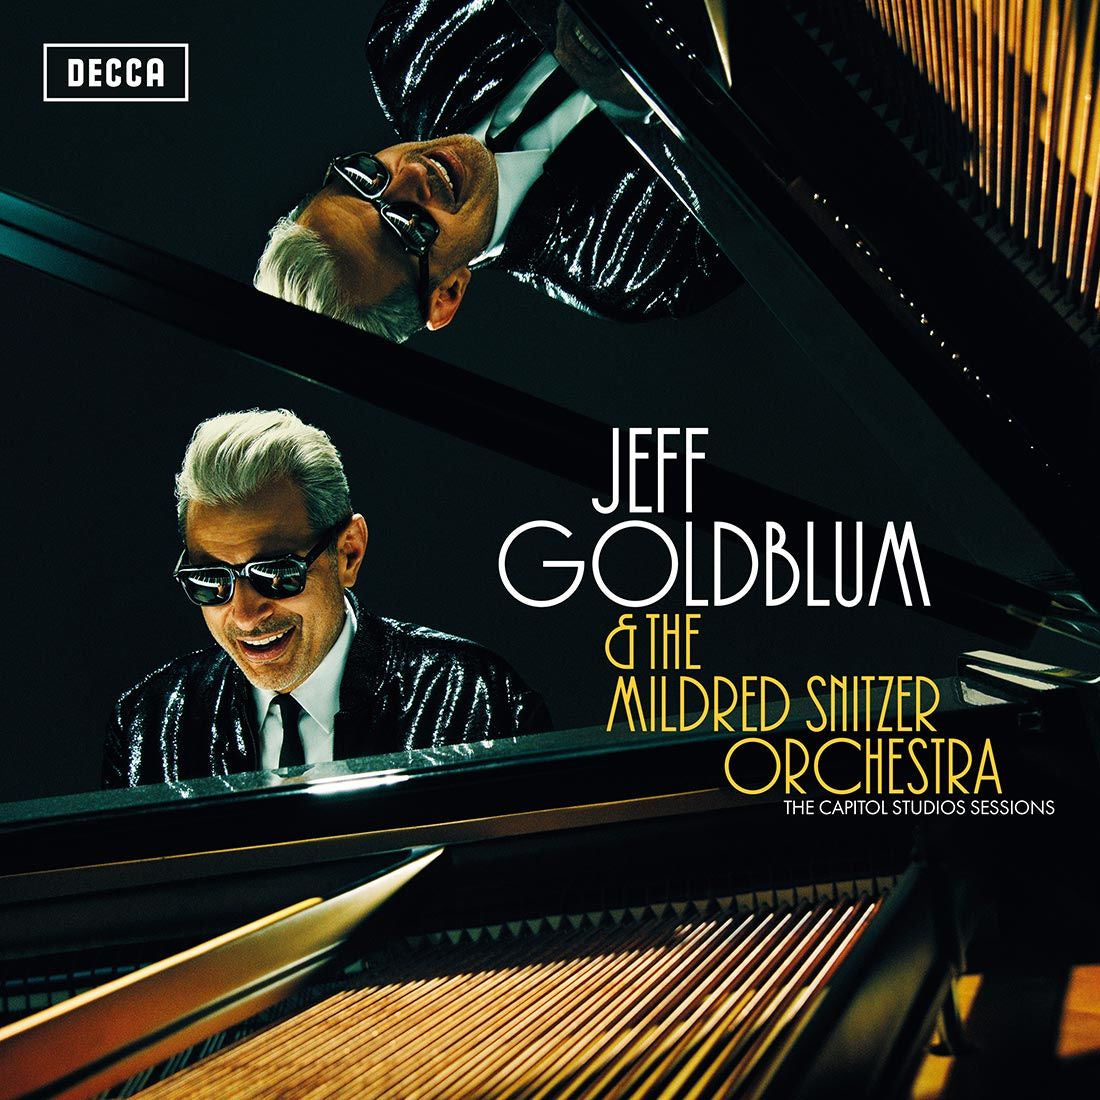 Jeff Goldblum & The Mildred Snitzer Orchestra - The Capitol Studios Sessions - New Vinyl 2 Lp 2018 Decca Import Pressing with Gatefold Jacket - Jazz / Standards